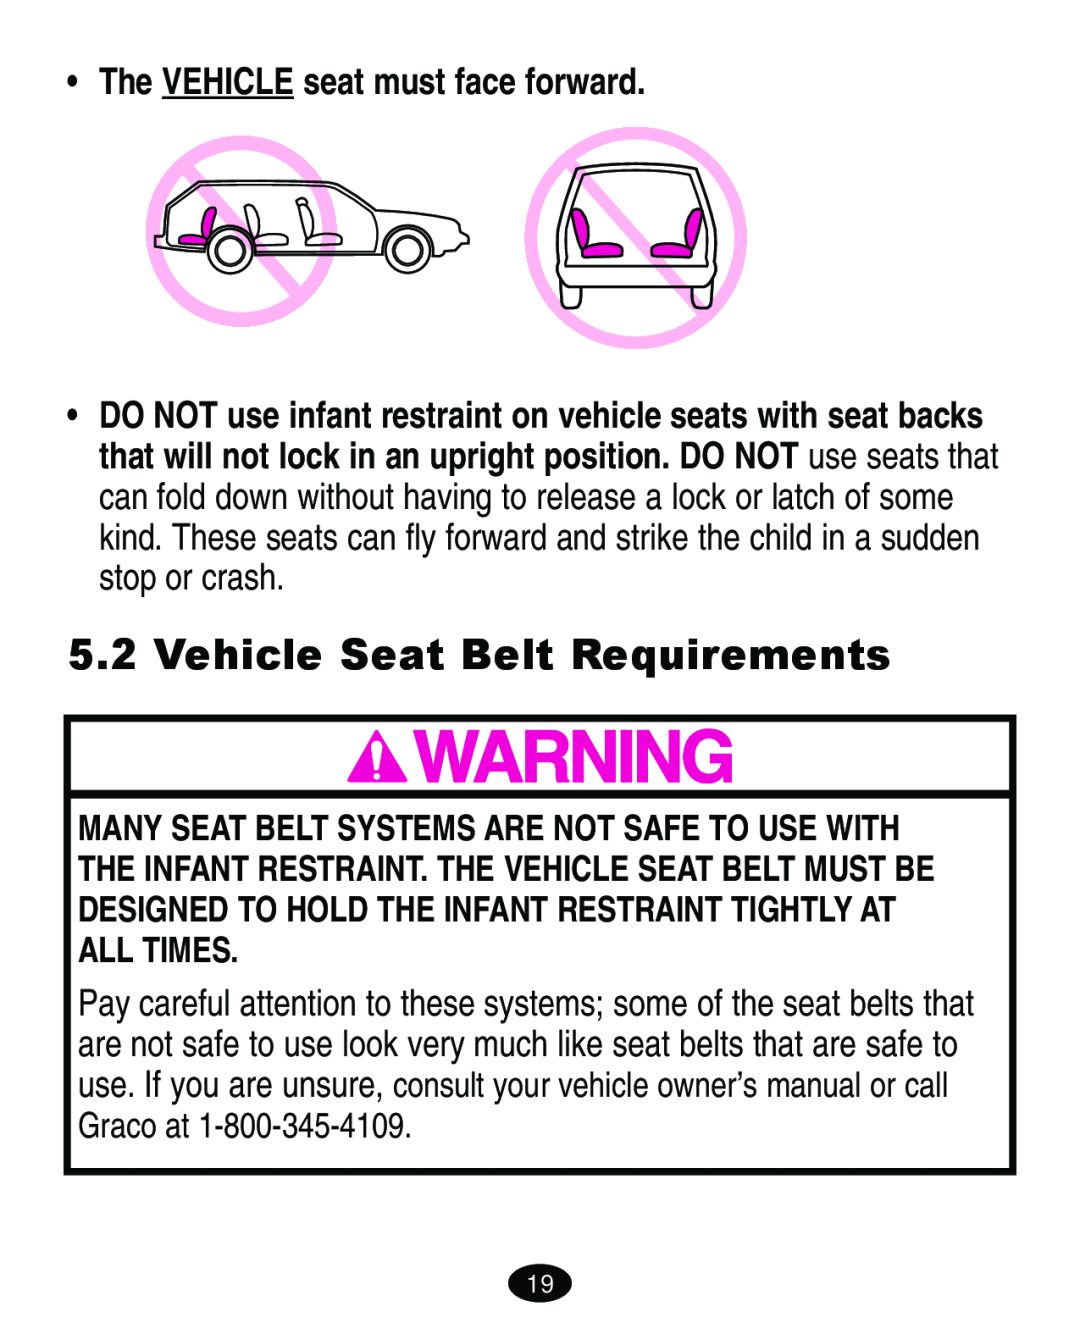 Graco ISPA113AA manual Vehicle Seat Belt Requirements, The VEHICLE seat must face forward 